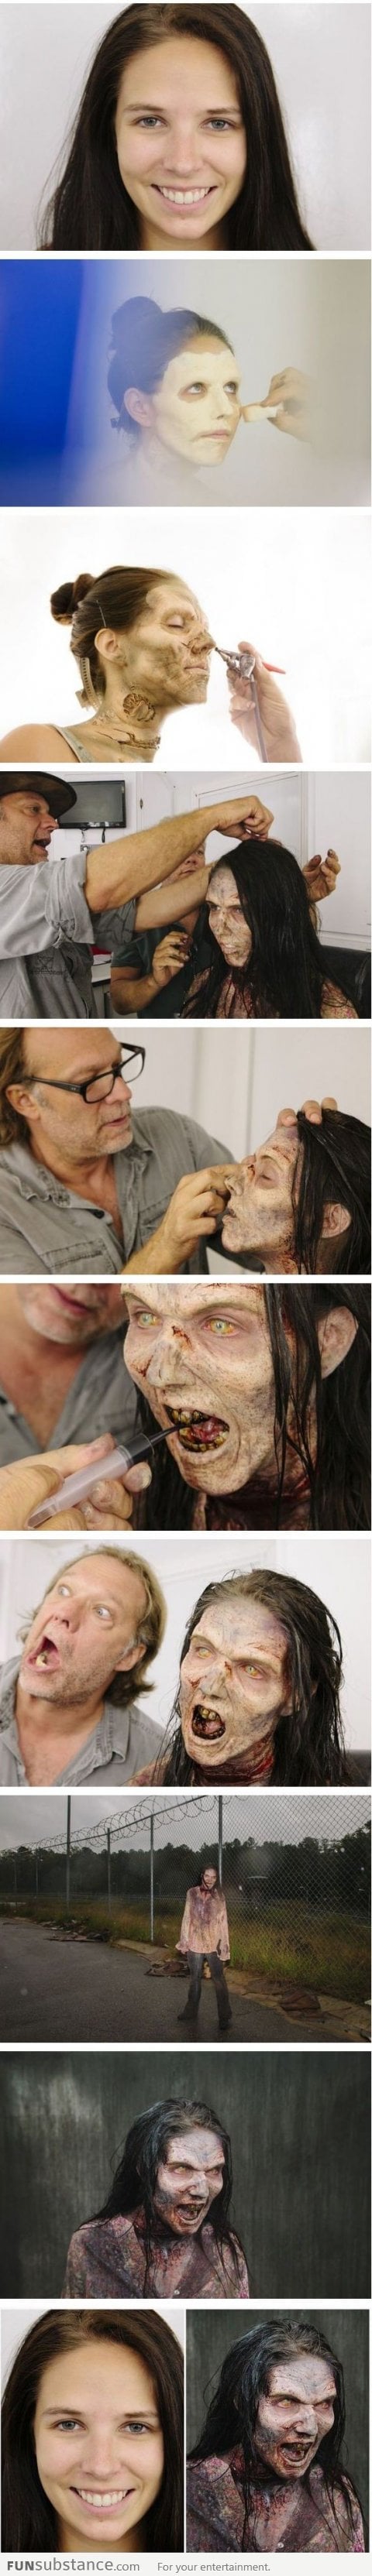 The Making Of A Zombie From 'The Walking Dead'